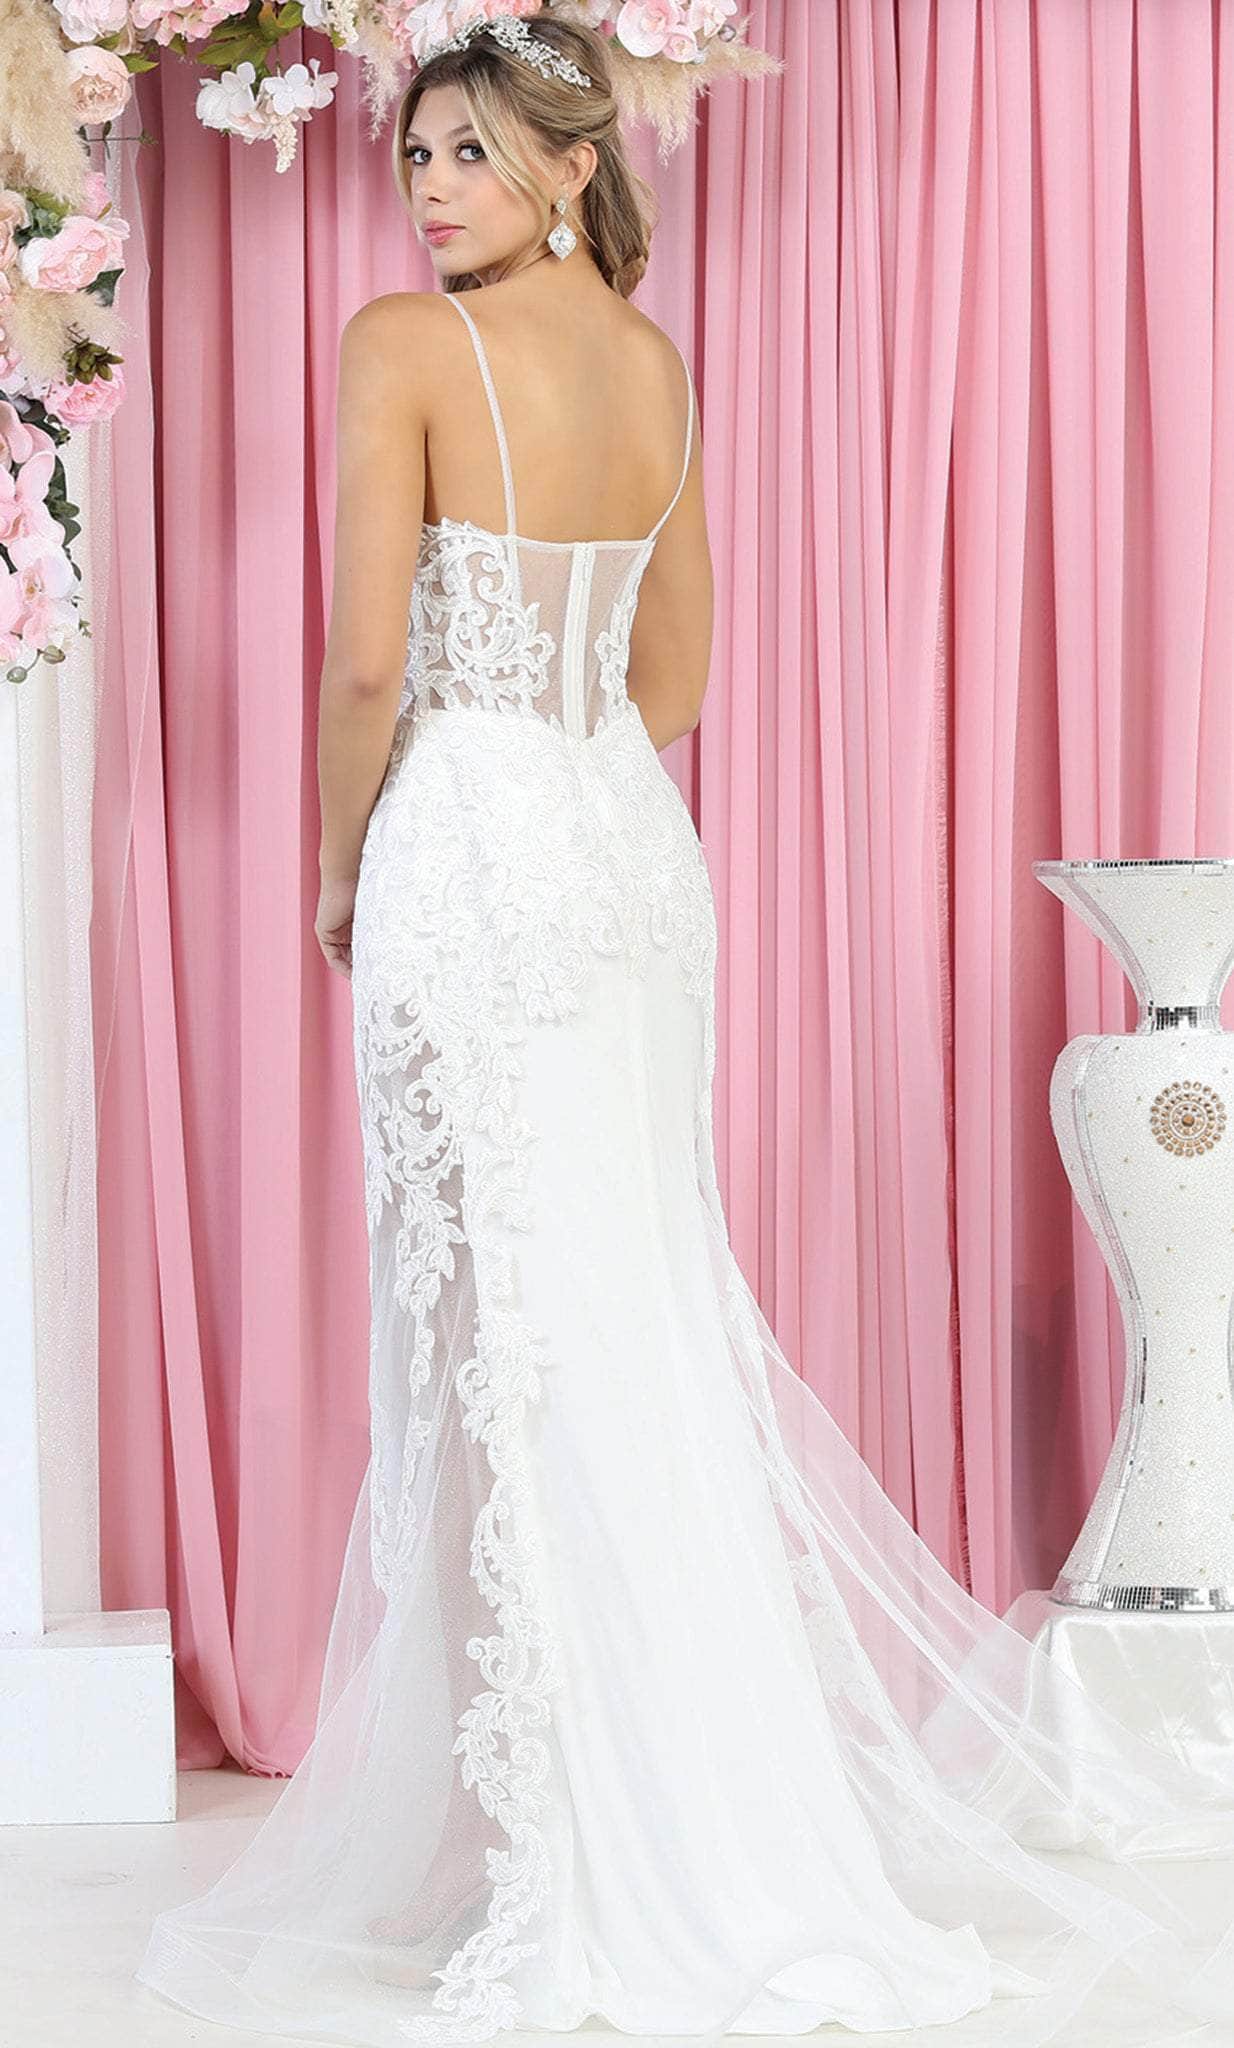 May Queen RQ7919 - Embroidered Mermaid Wedding Gown Special Occasion Dress